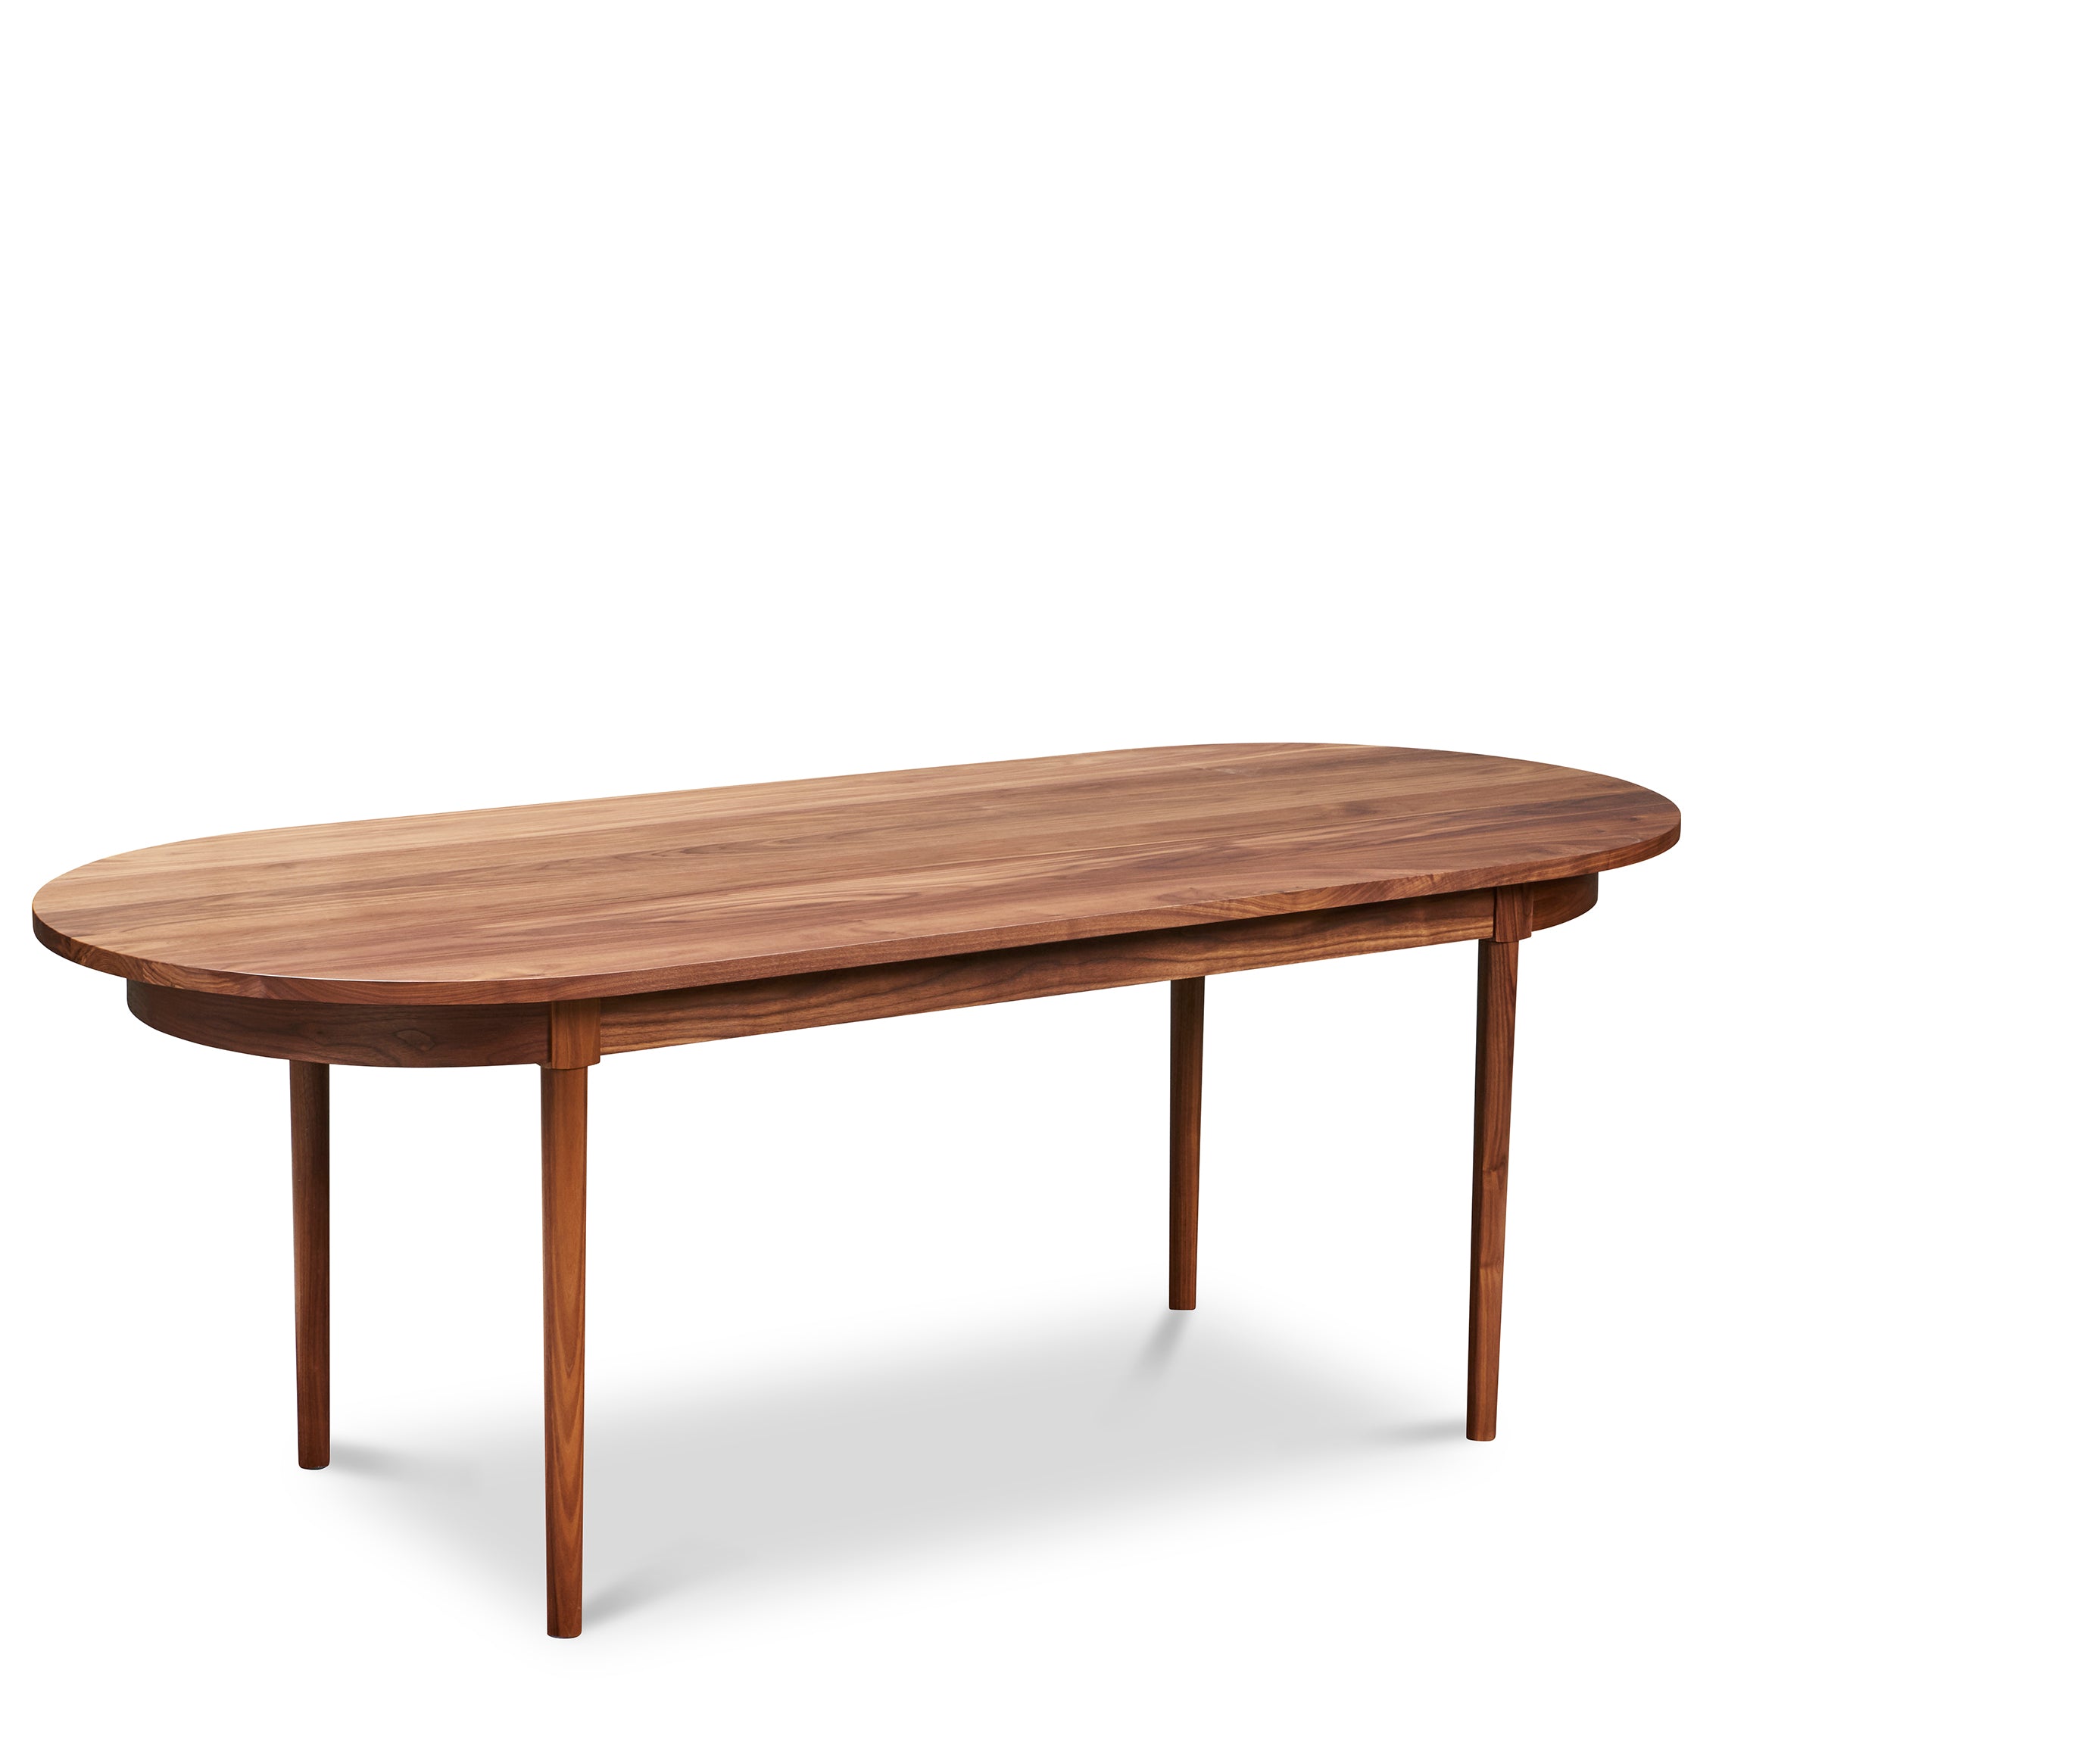 Solid walnut Highland oval dining table from Chilton Furniture Co. in Maine